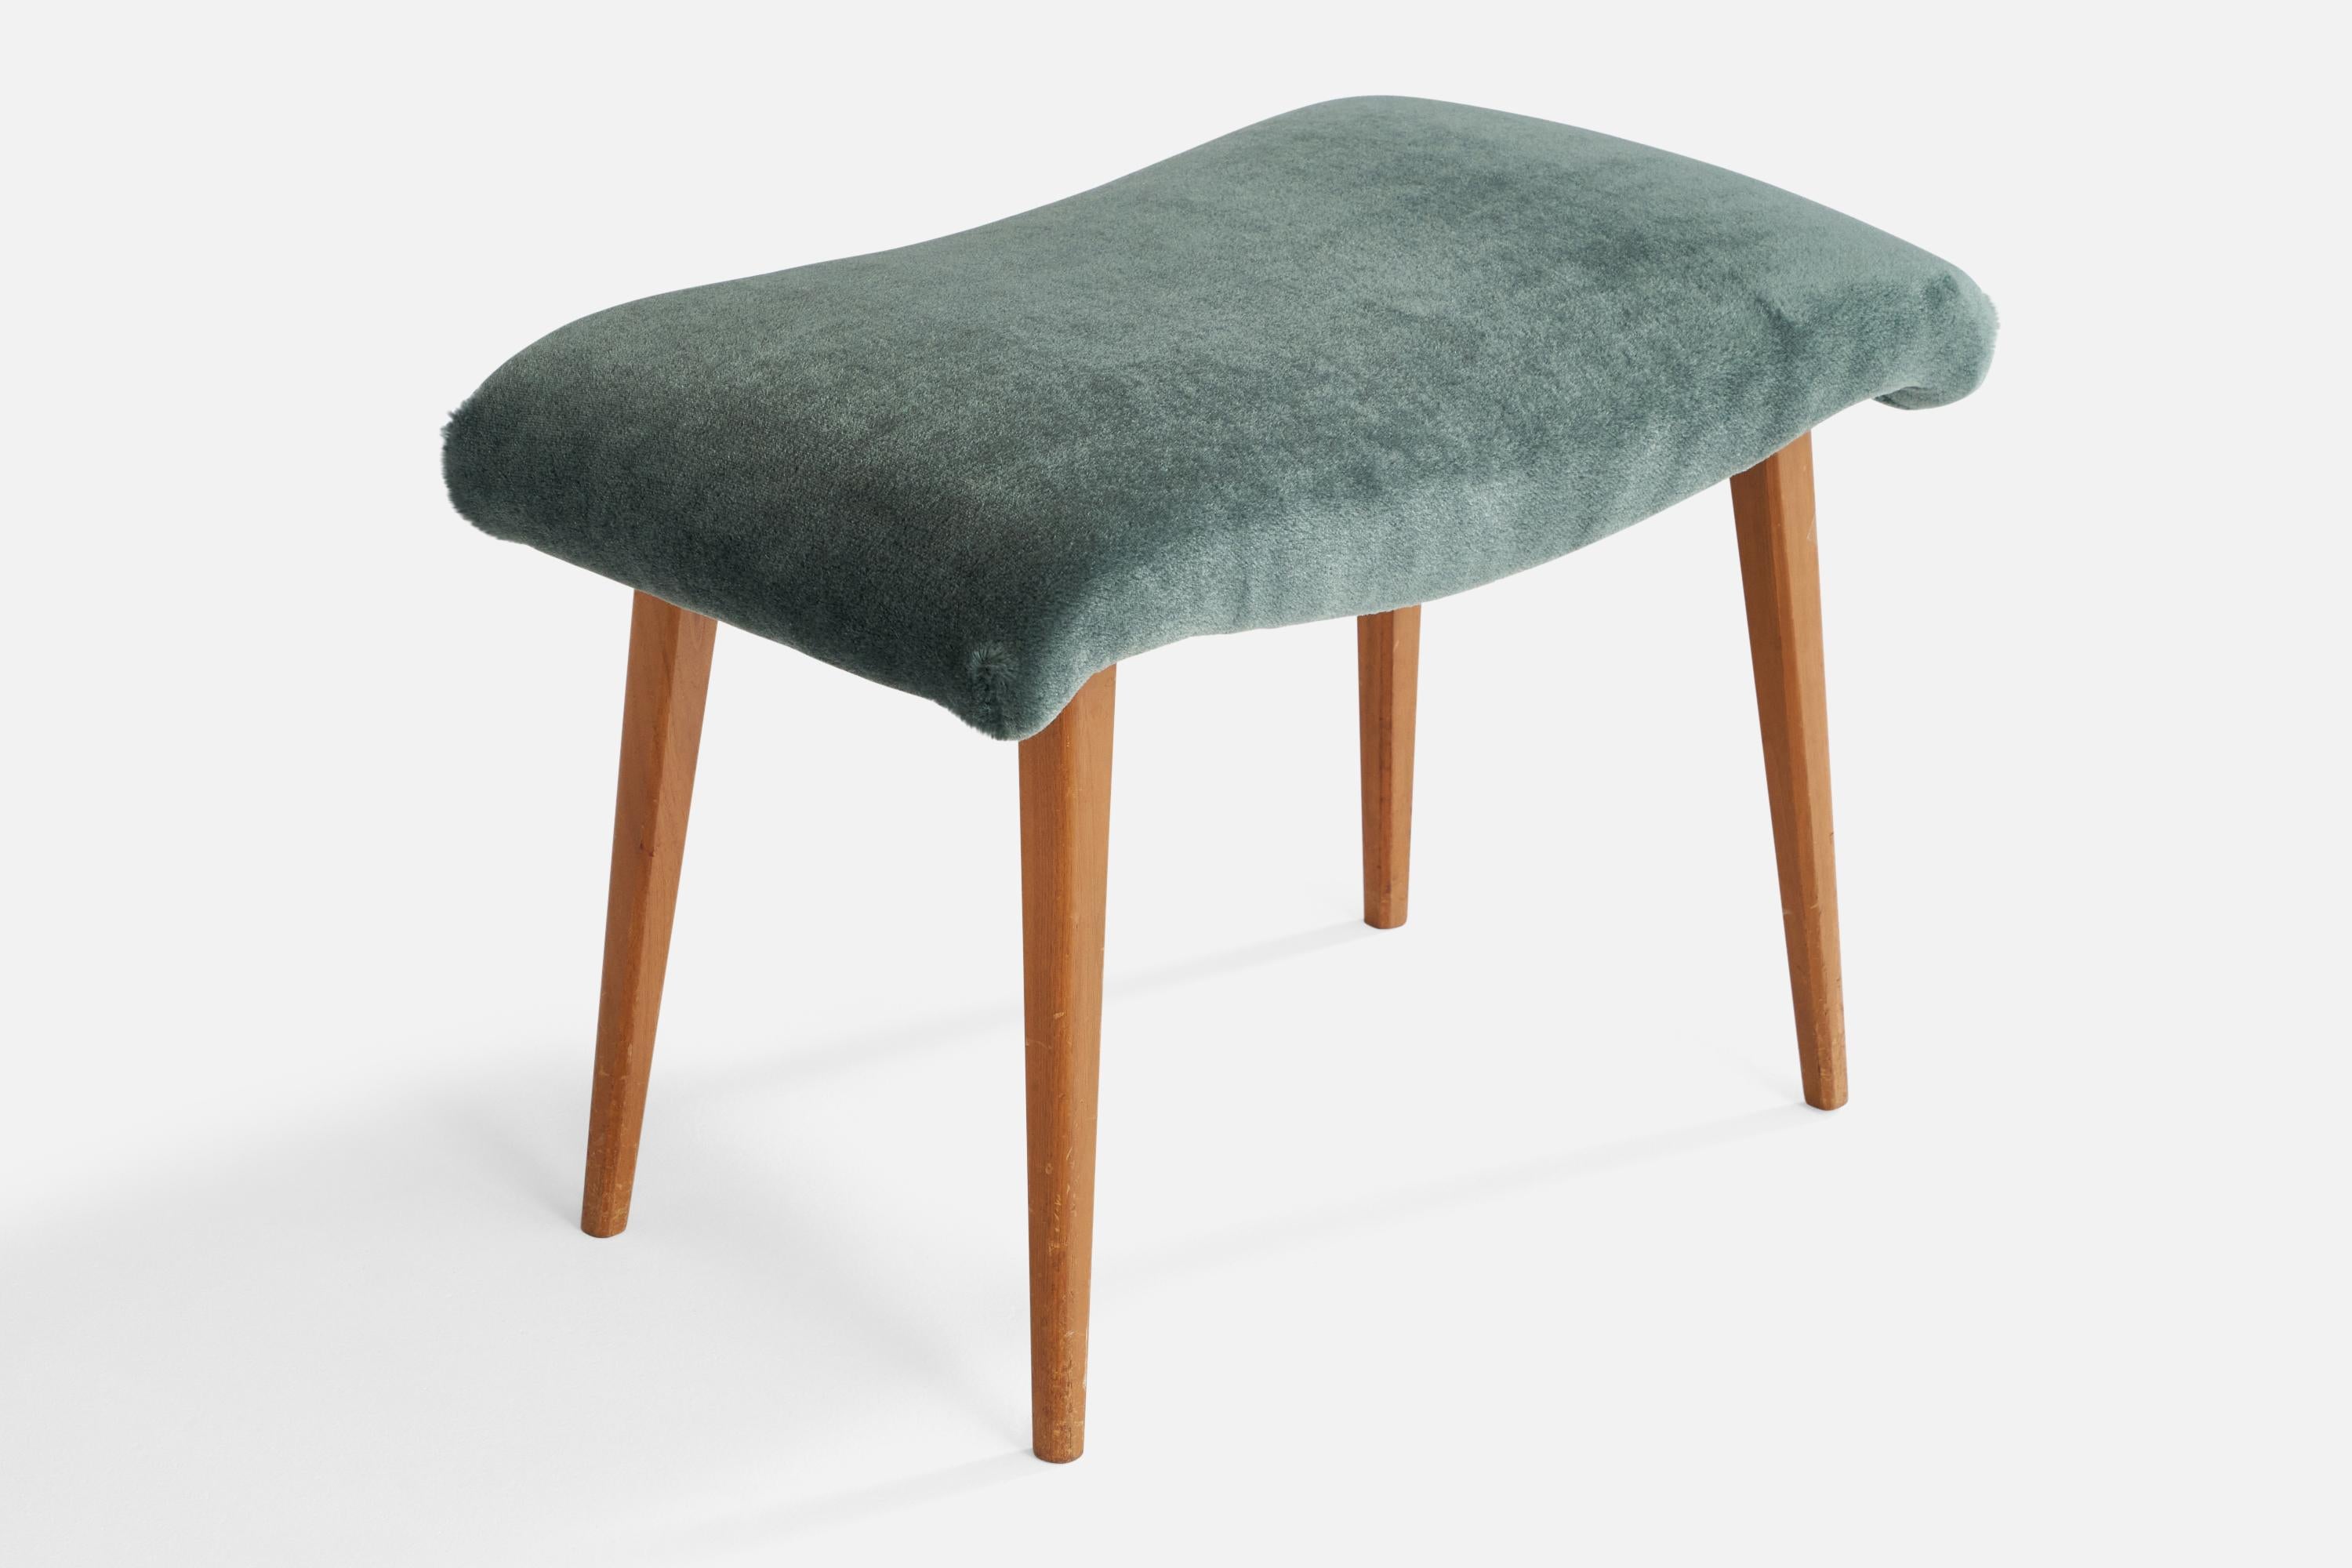 A wood and blue mohair stool designed and produced in Sweden, 1940s.

Seat height: 16”